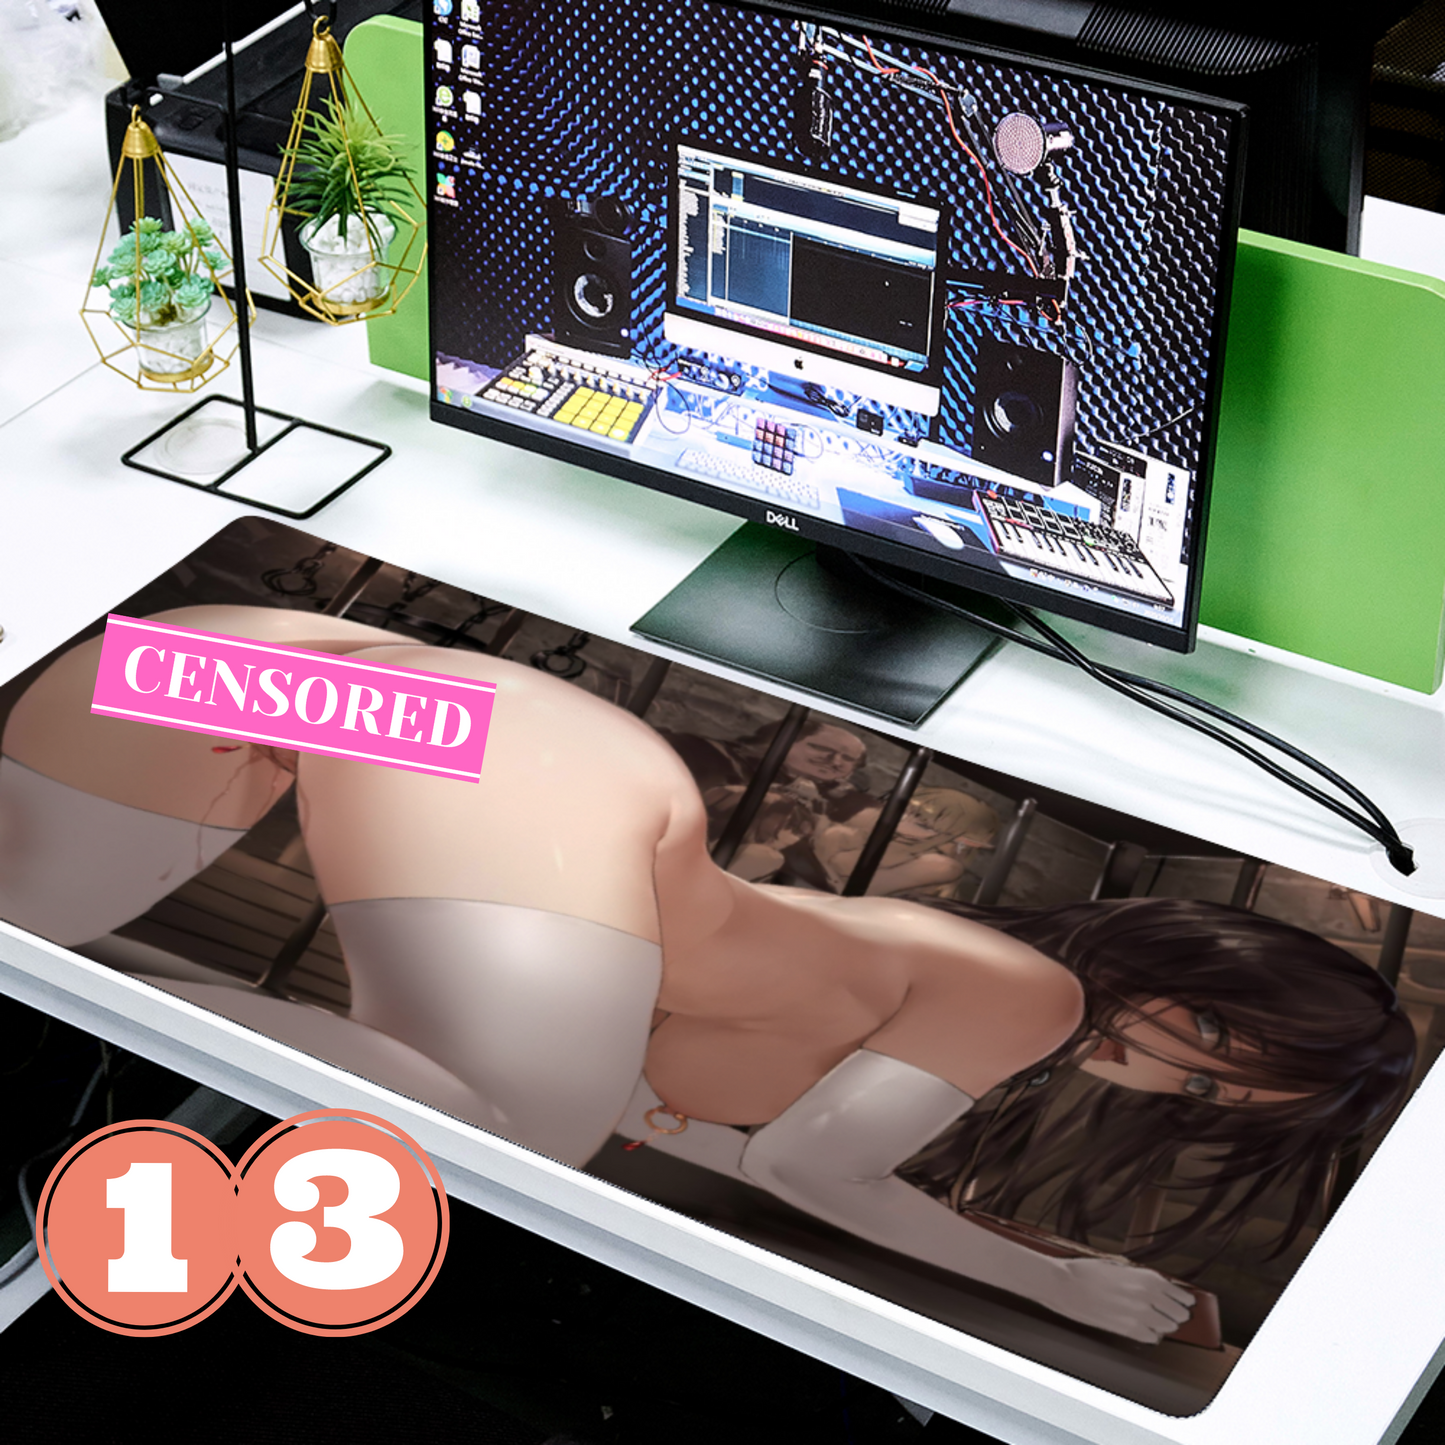 Anime sexy Mouse pad/Desk mats | Large Ecchi Sexy mousepads for computer | NSFW mousepads for gamers